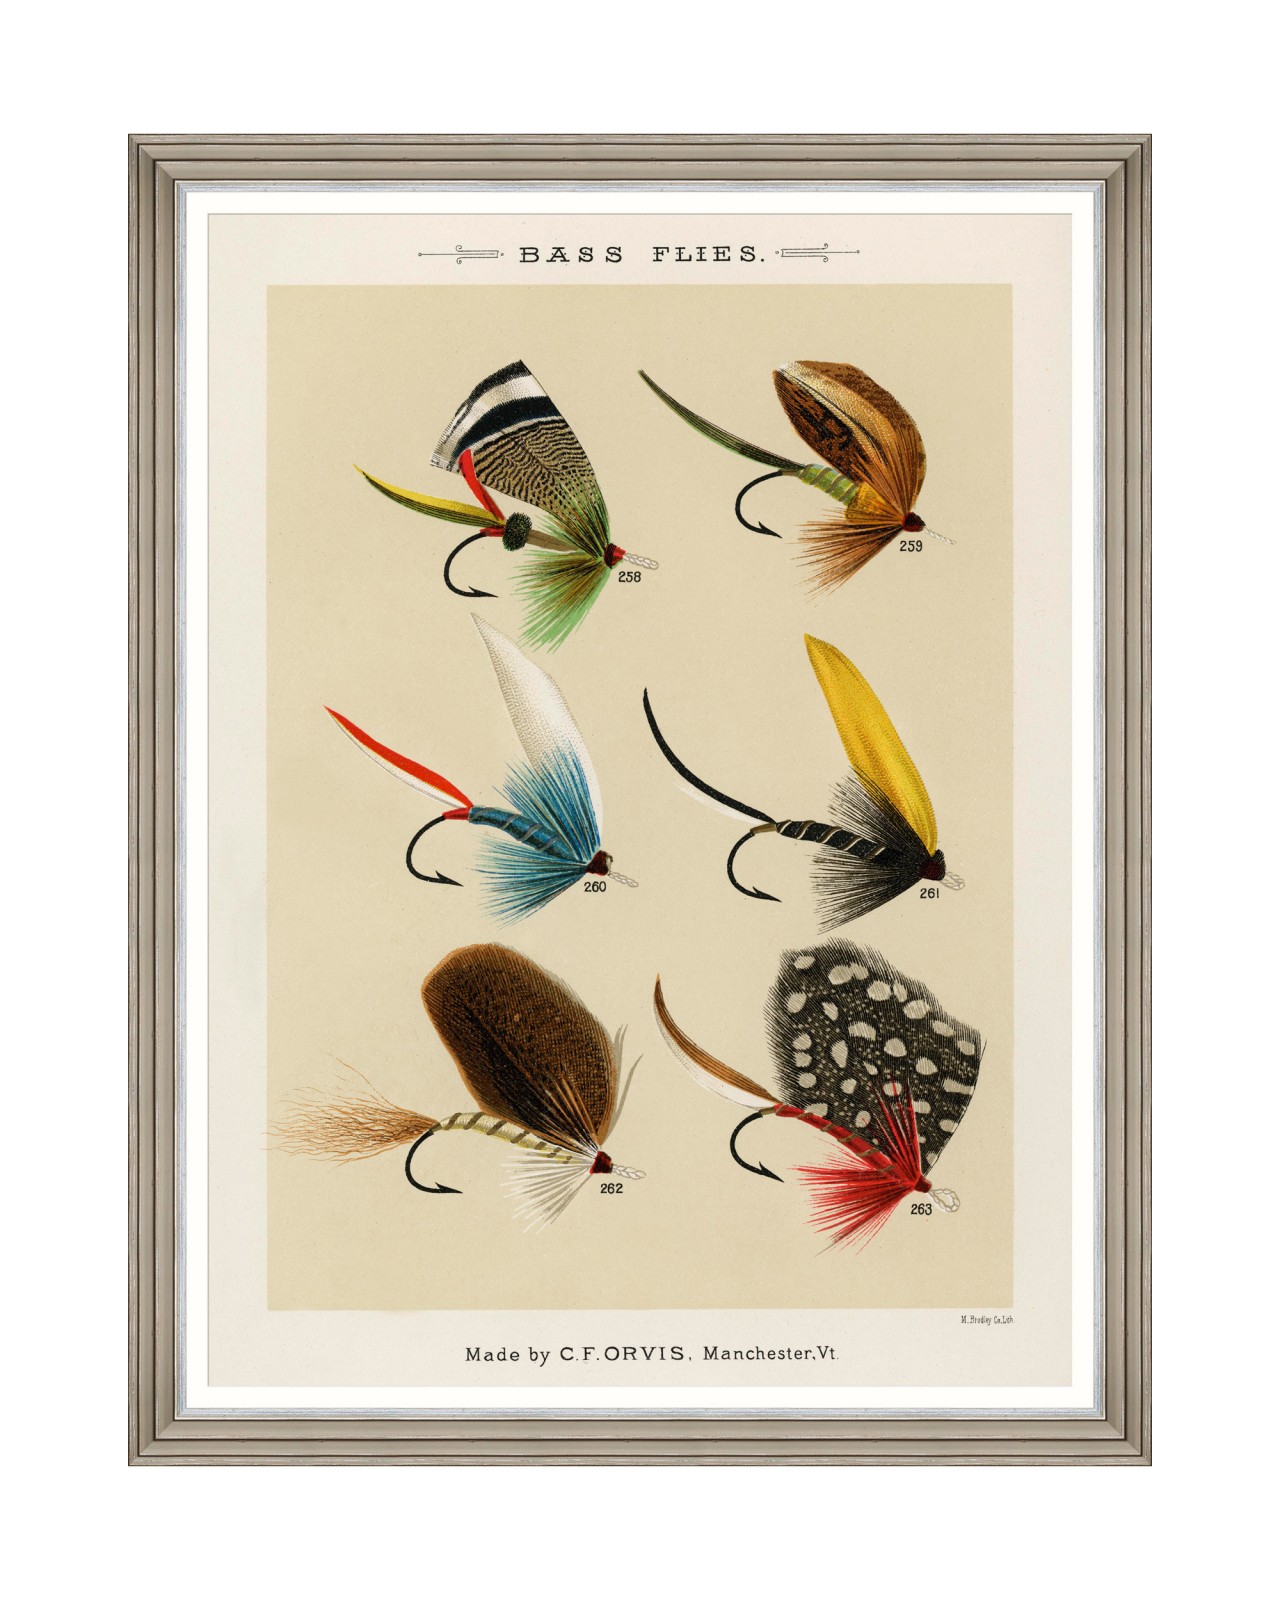 images/productimages/small/fishing-flies-iv-by-mary-orvis-marbury-framed-art-60x80cm-fa13329-1.jpg